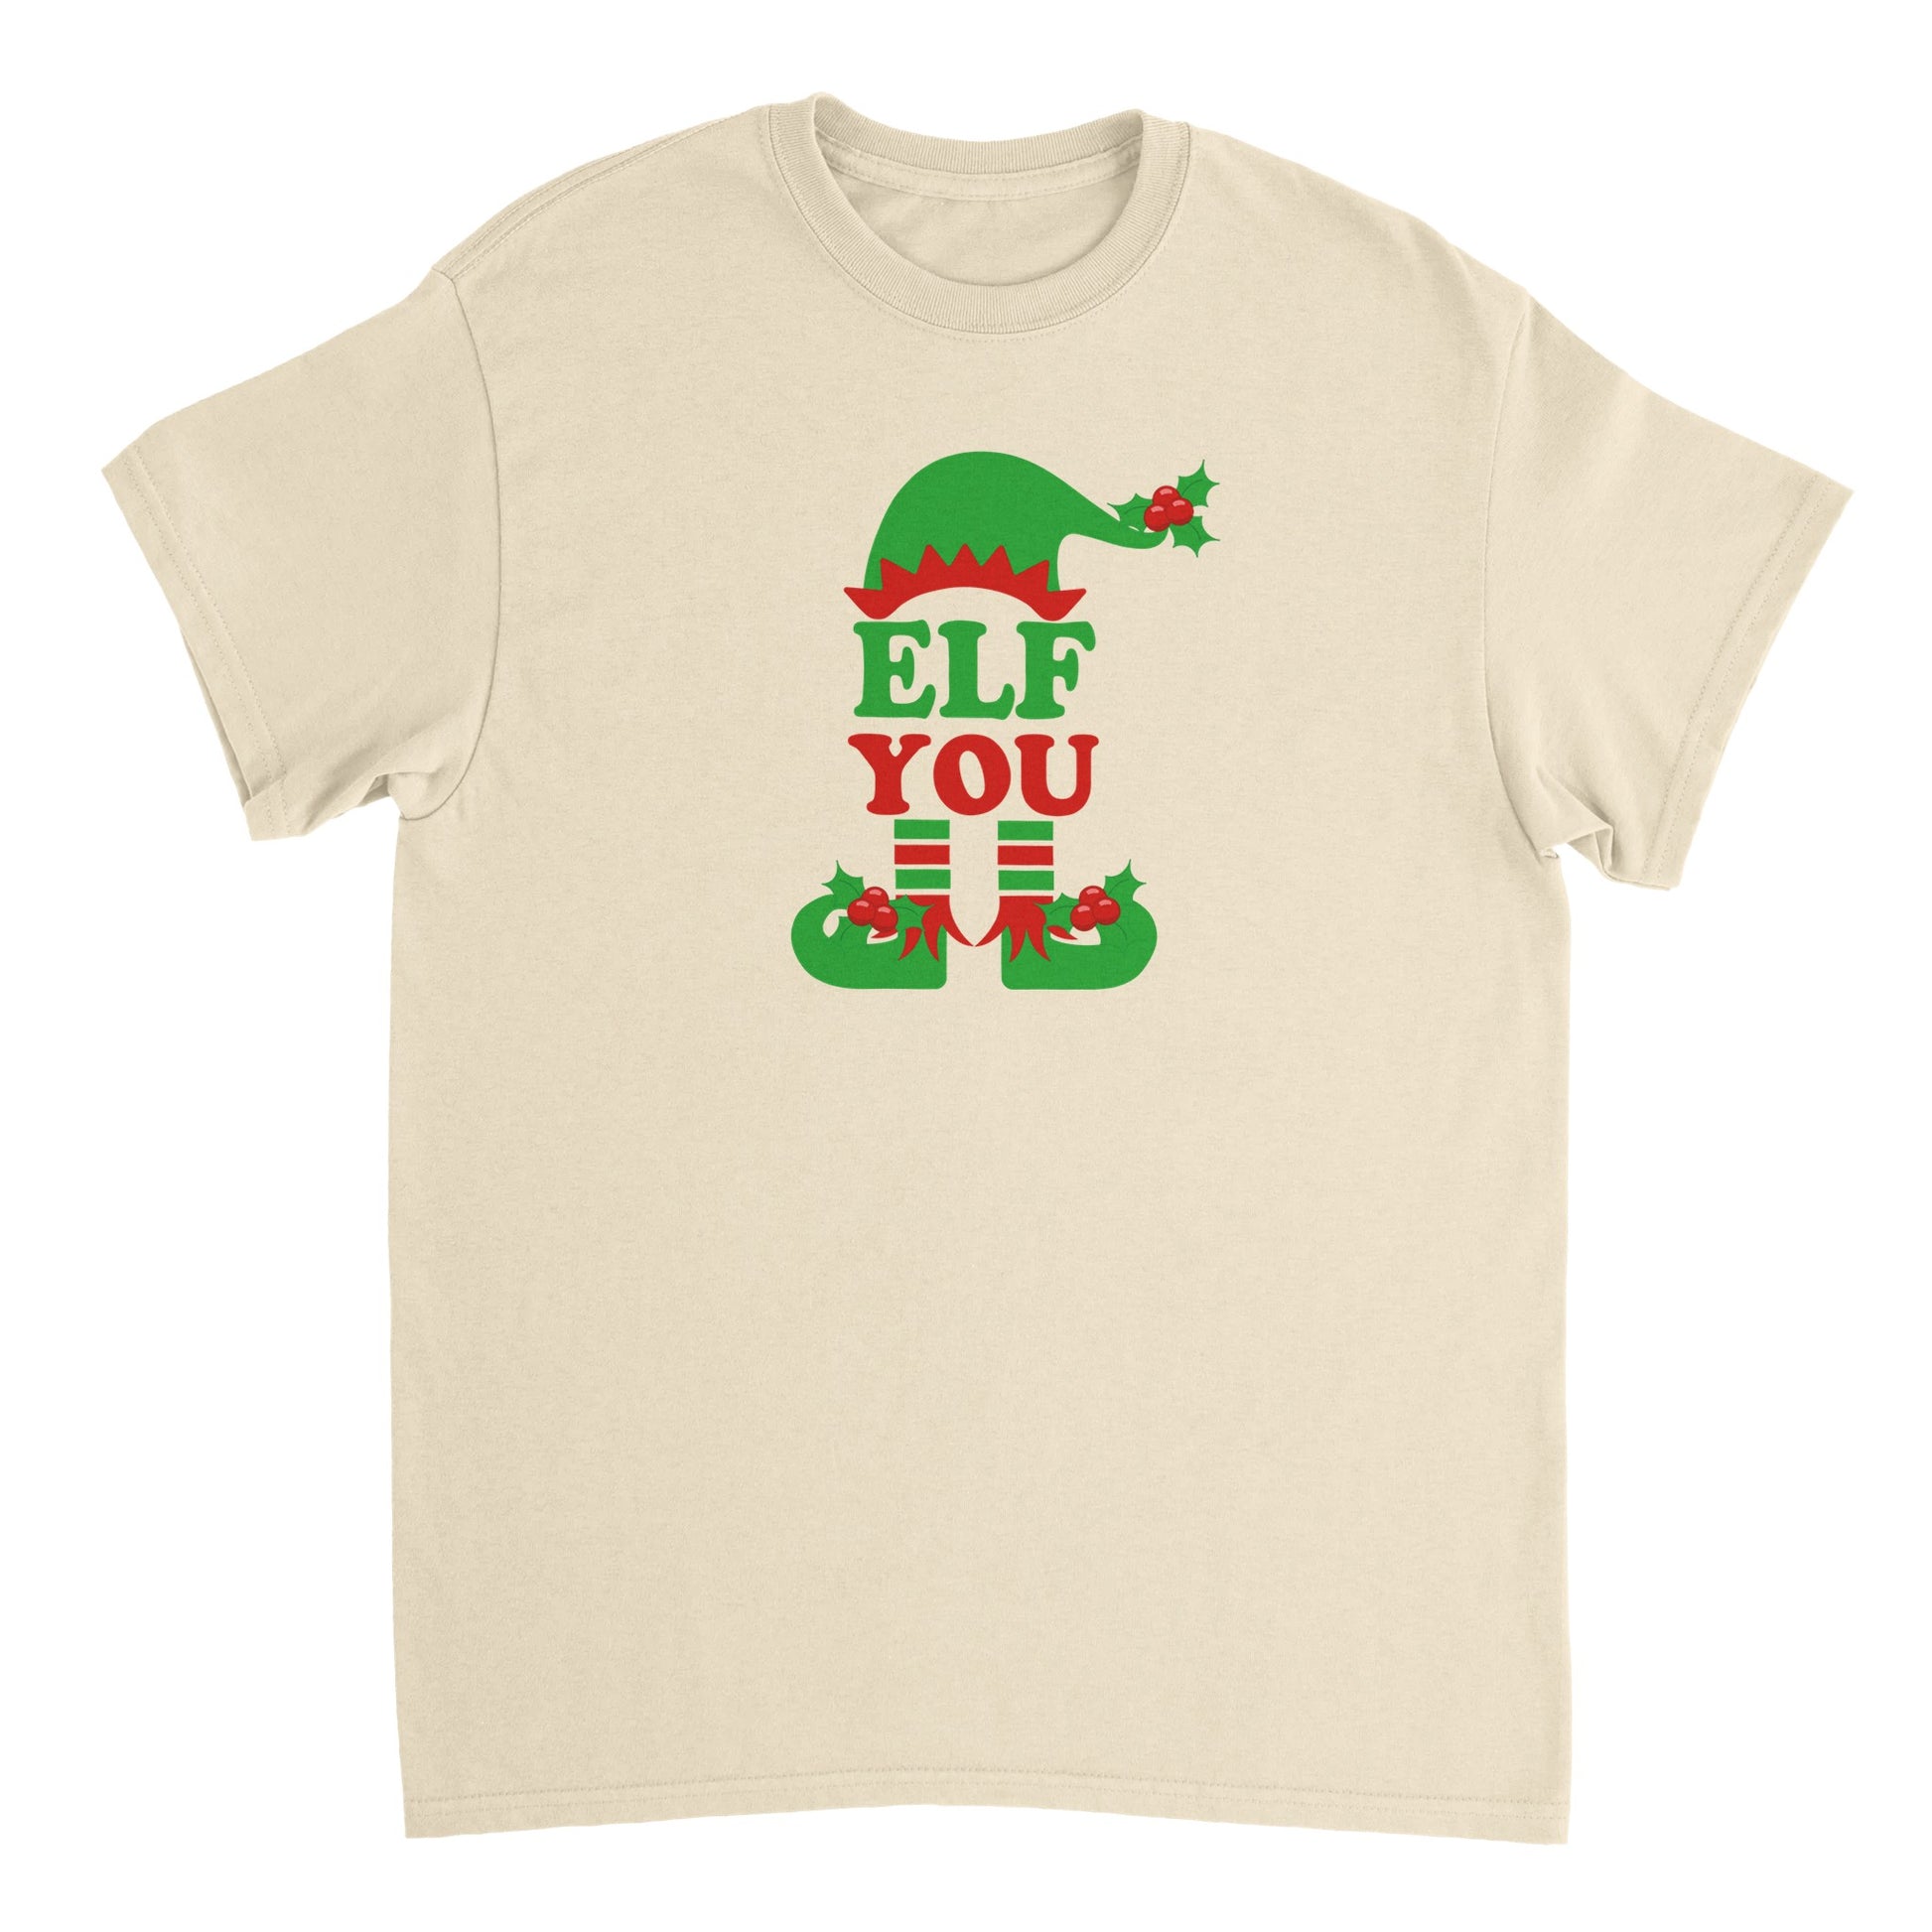 a t - shirt with an elf's hat on it